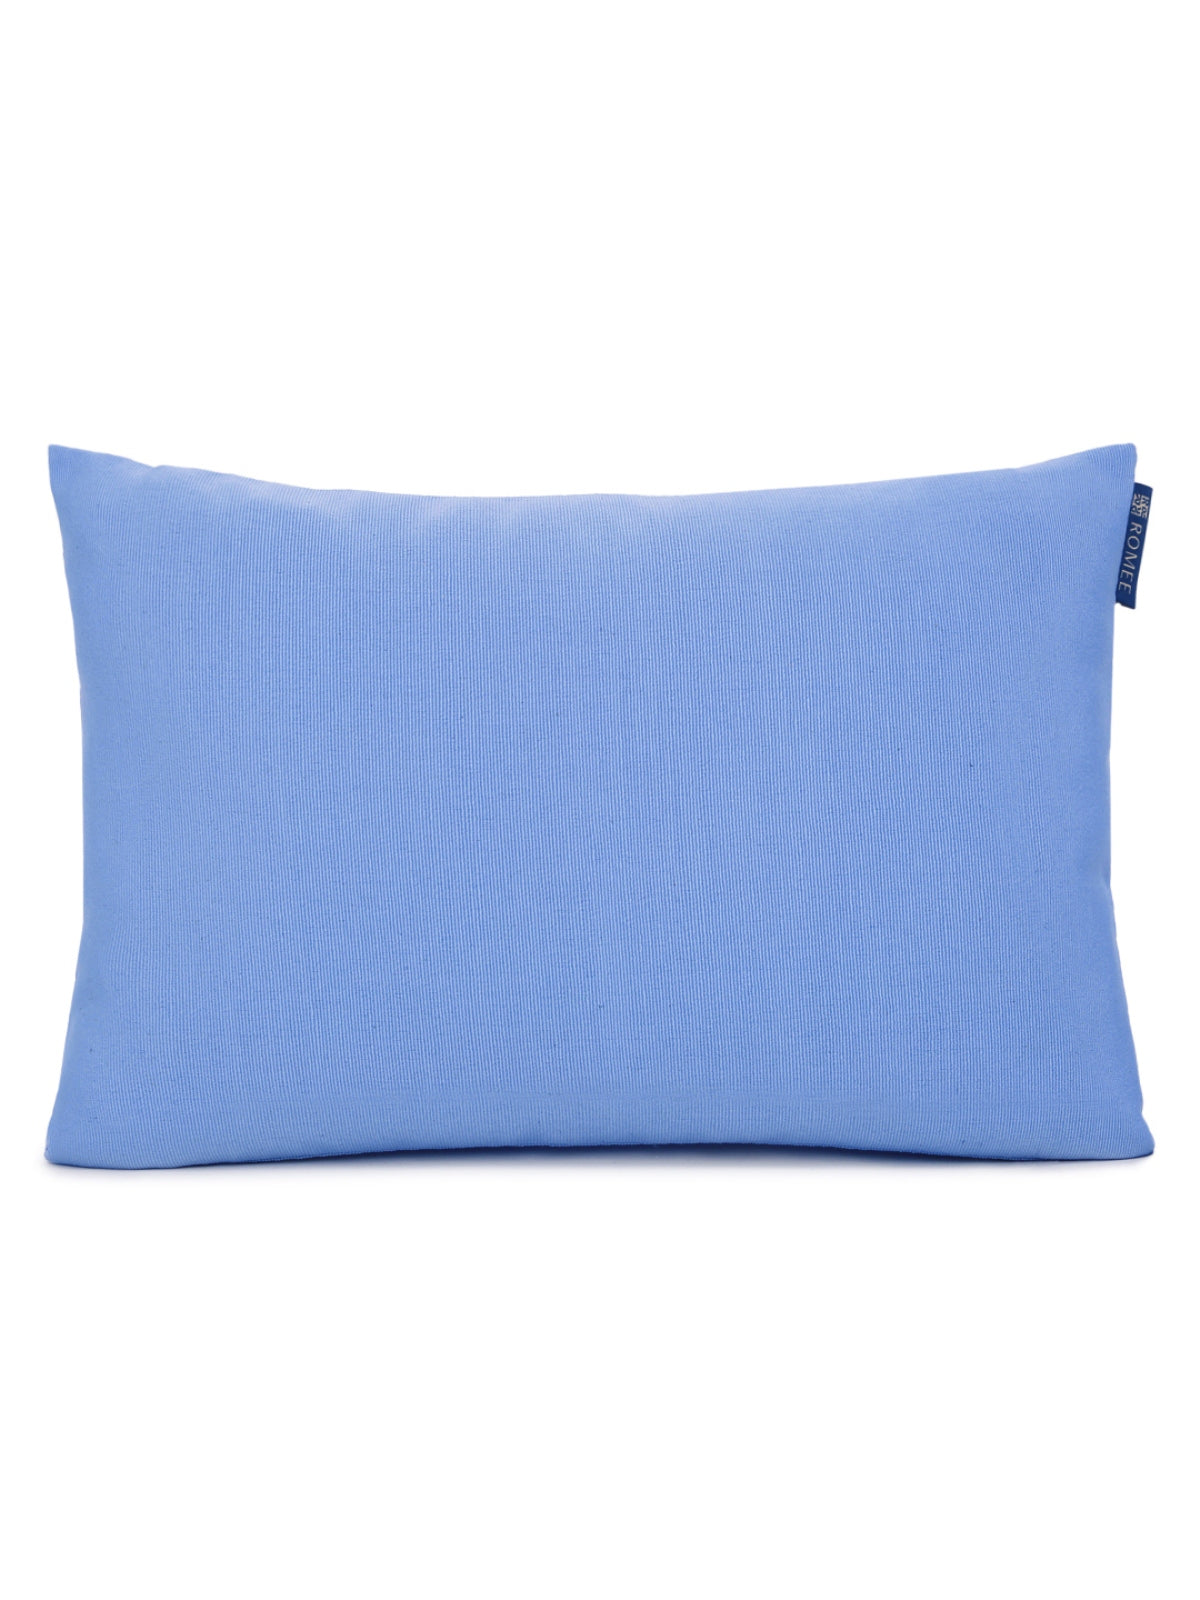 ROMEE Blue Solid Printed Cushion Covers Set of 2